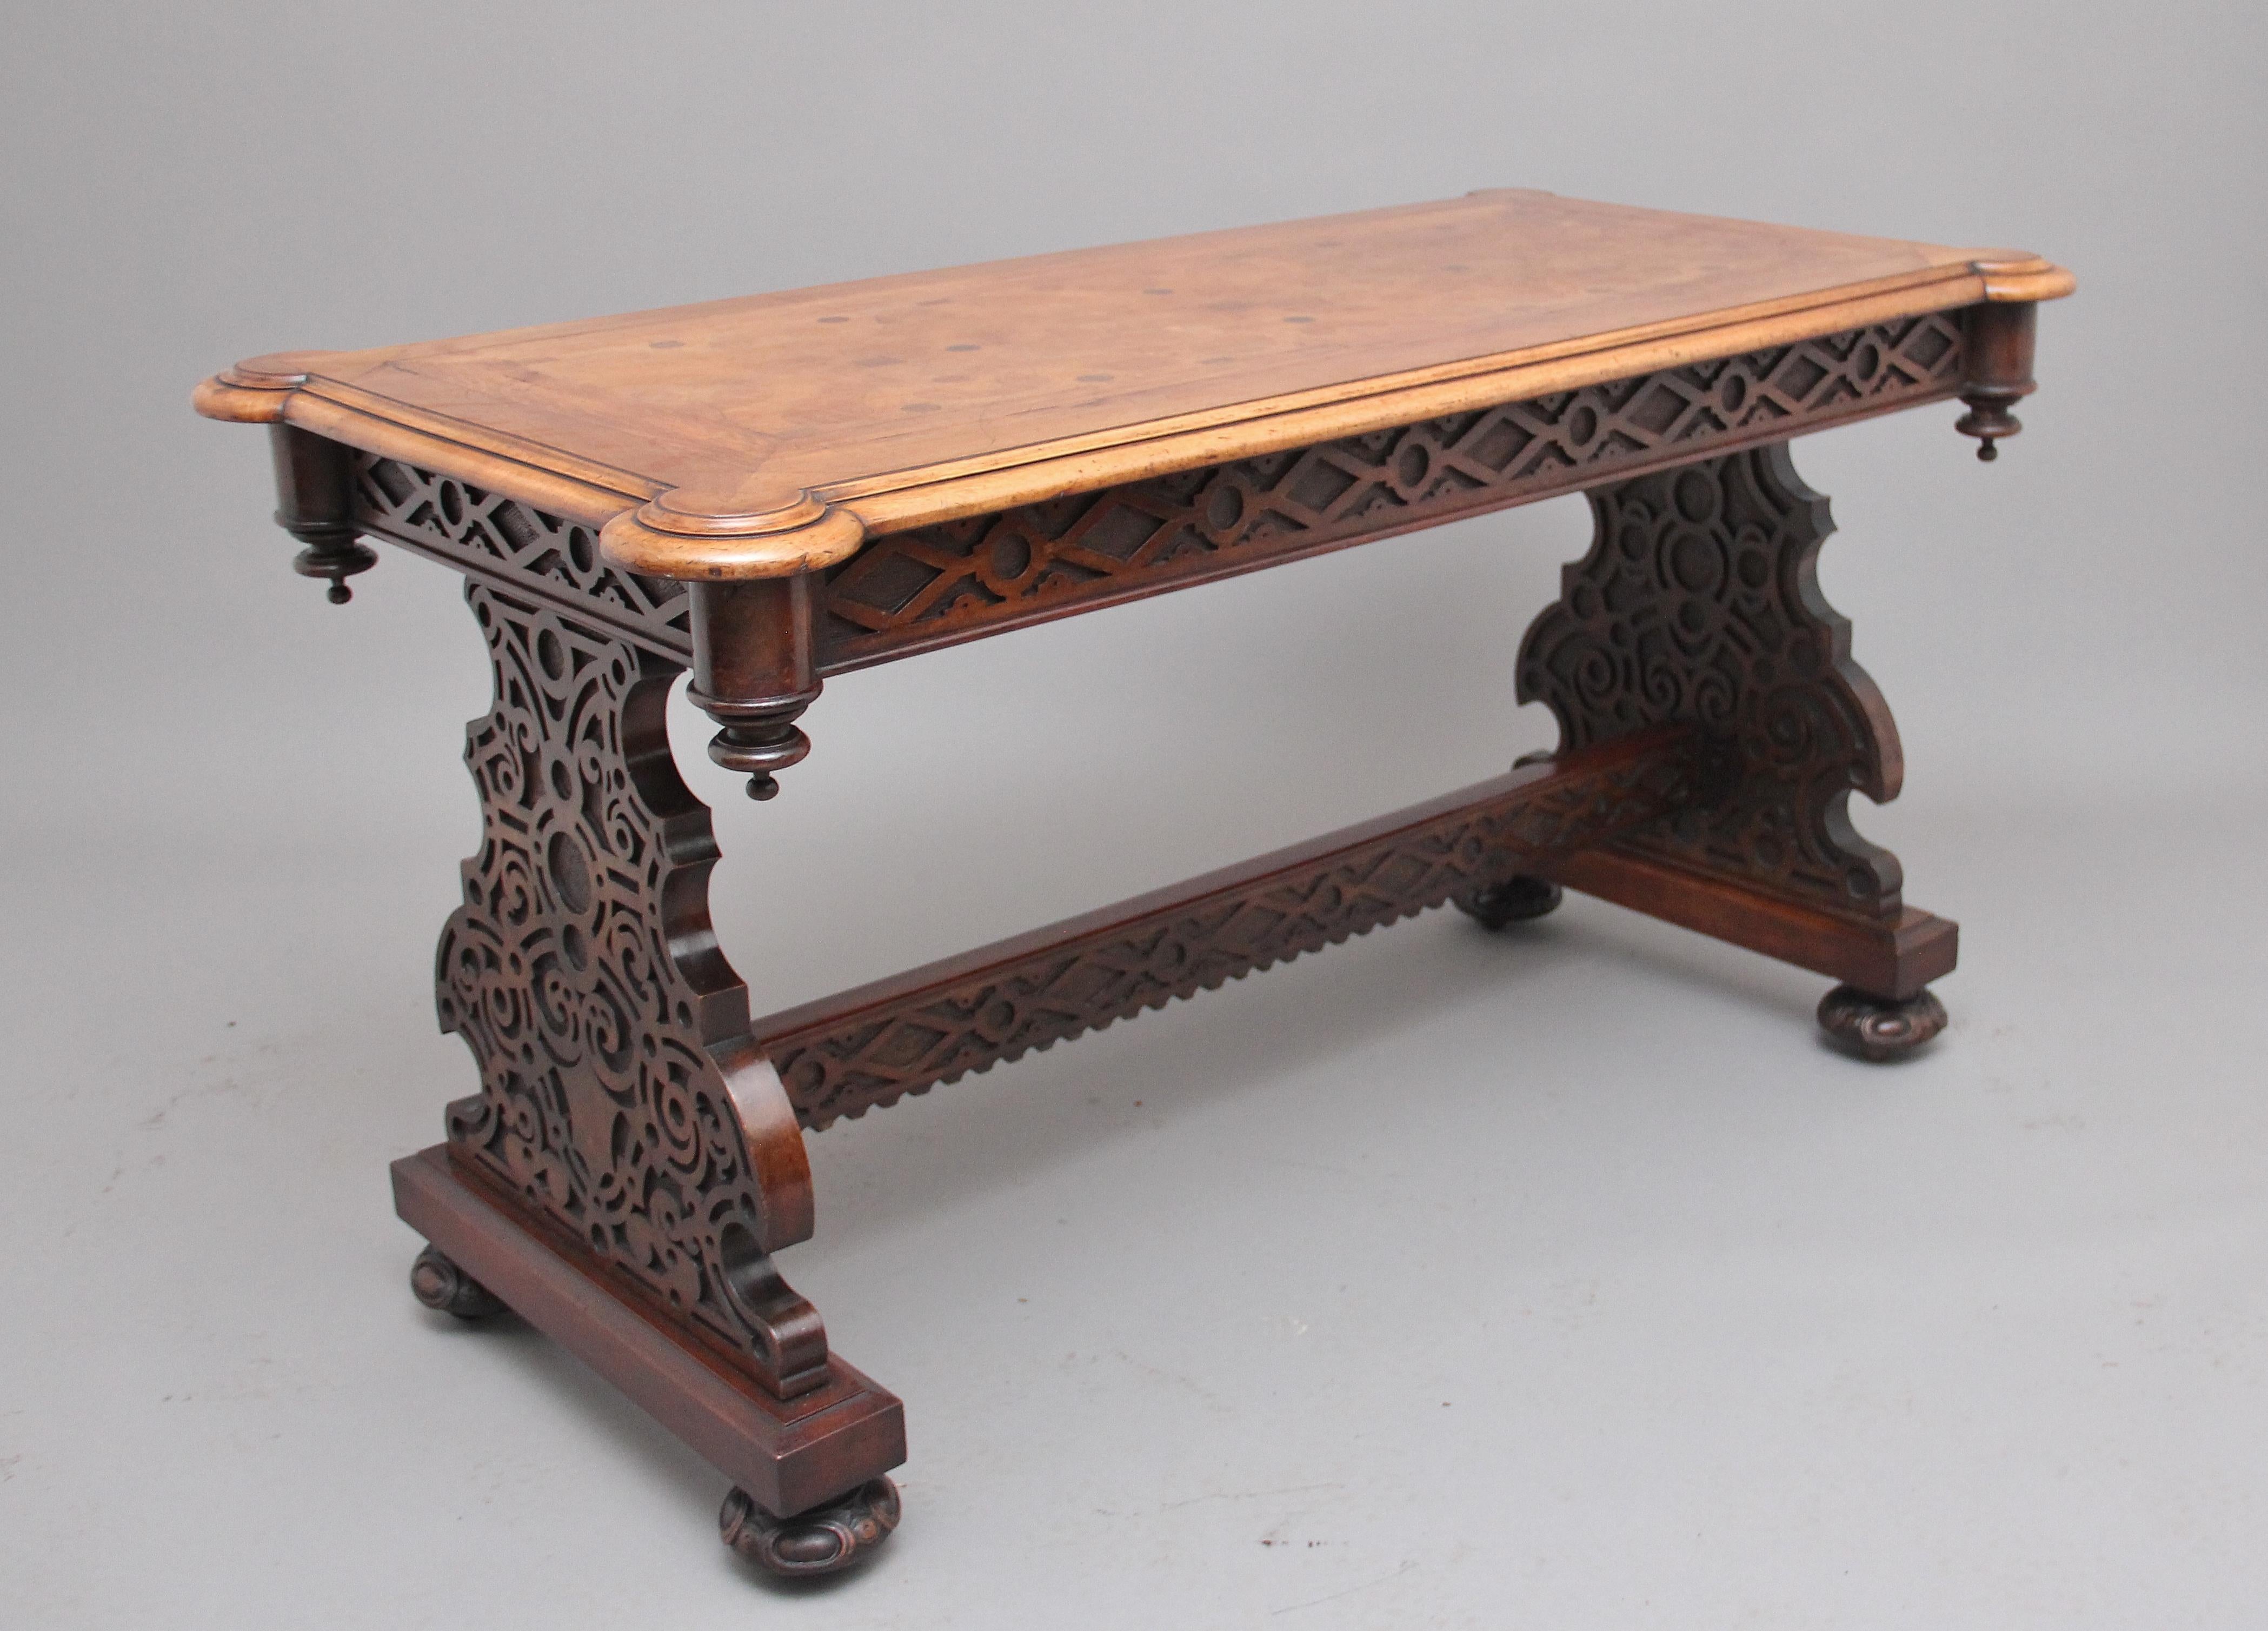 A superb quality 19th century walnut and oak inlaid library / centre table, having a moulded edge top with rounded corners, highly decorative inlaid top with oak inlay, pierced and carved frieze below with circular columns in each corner decorated